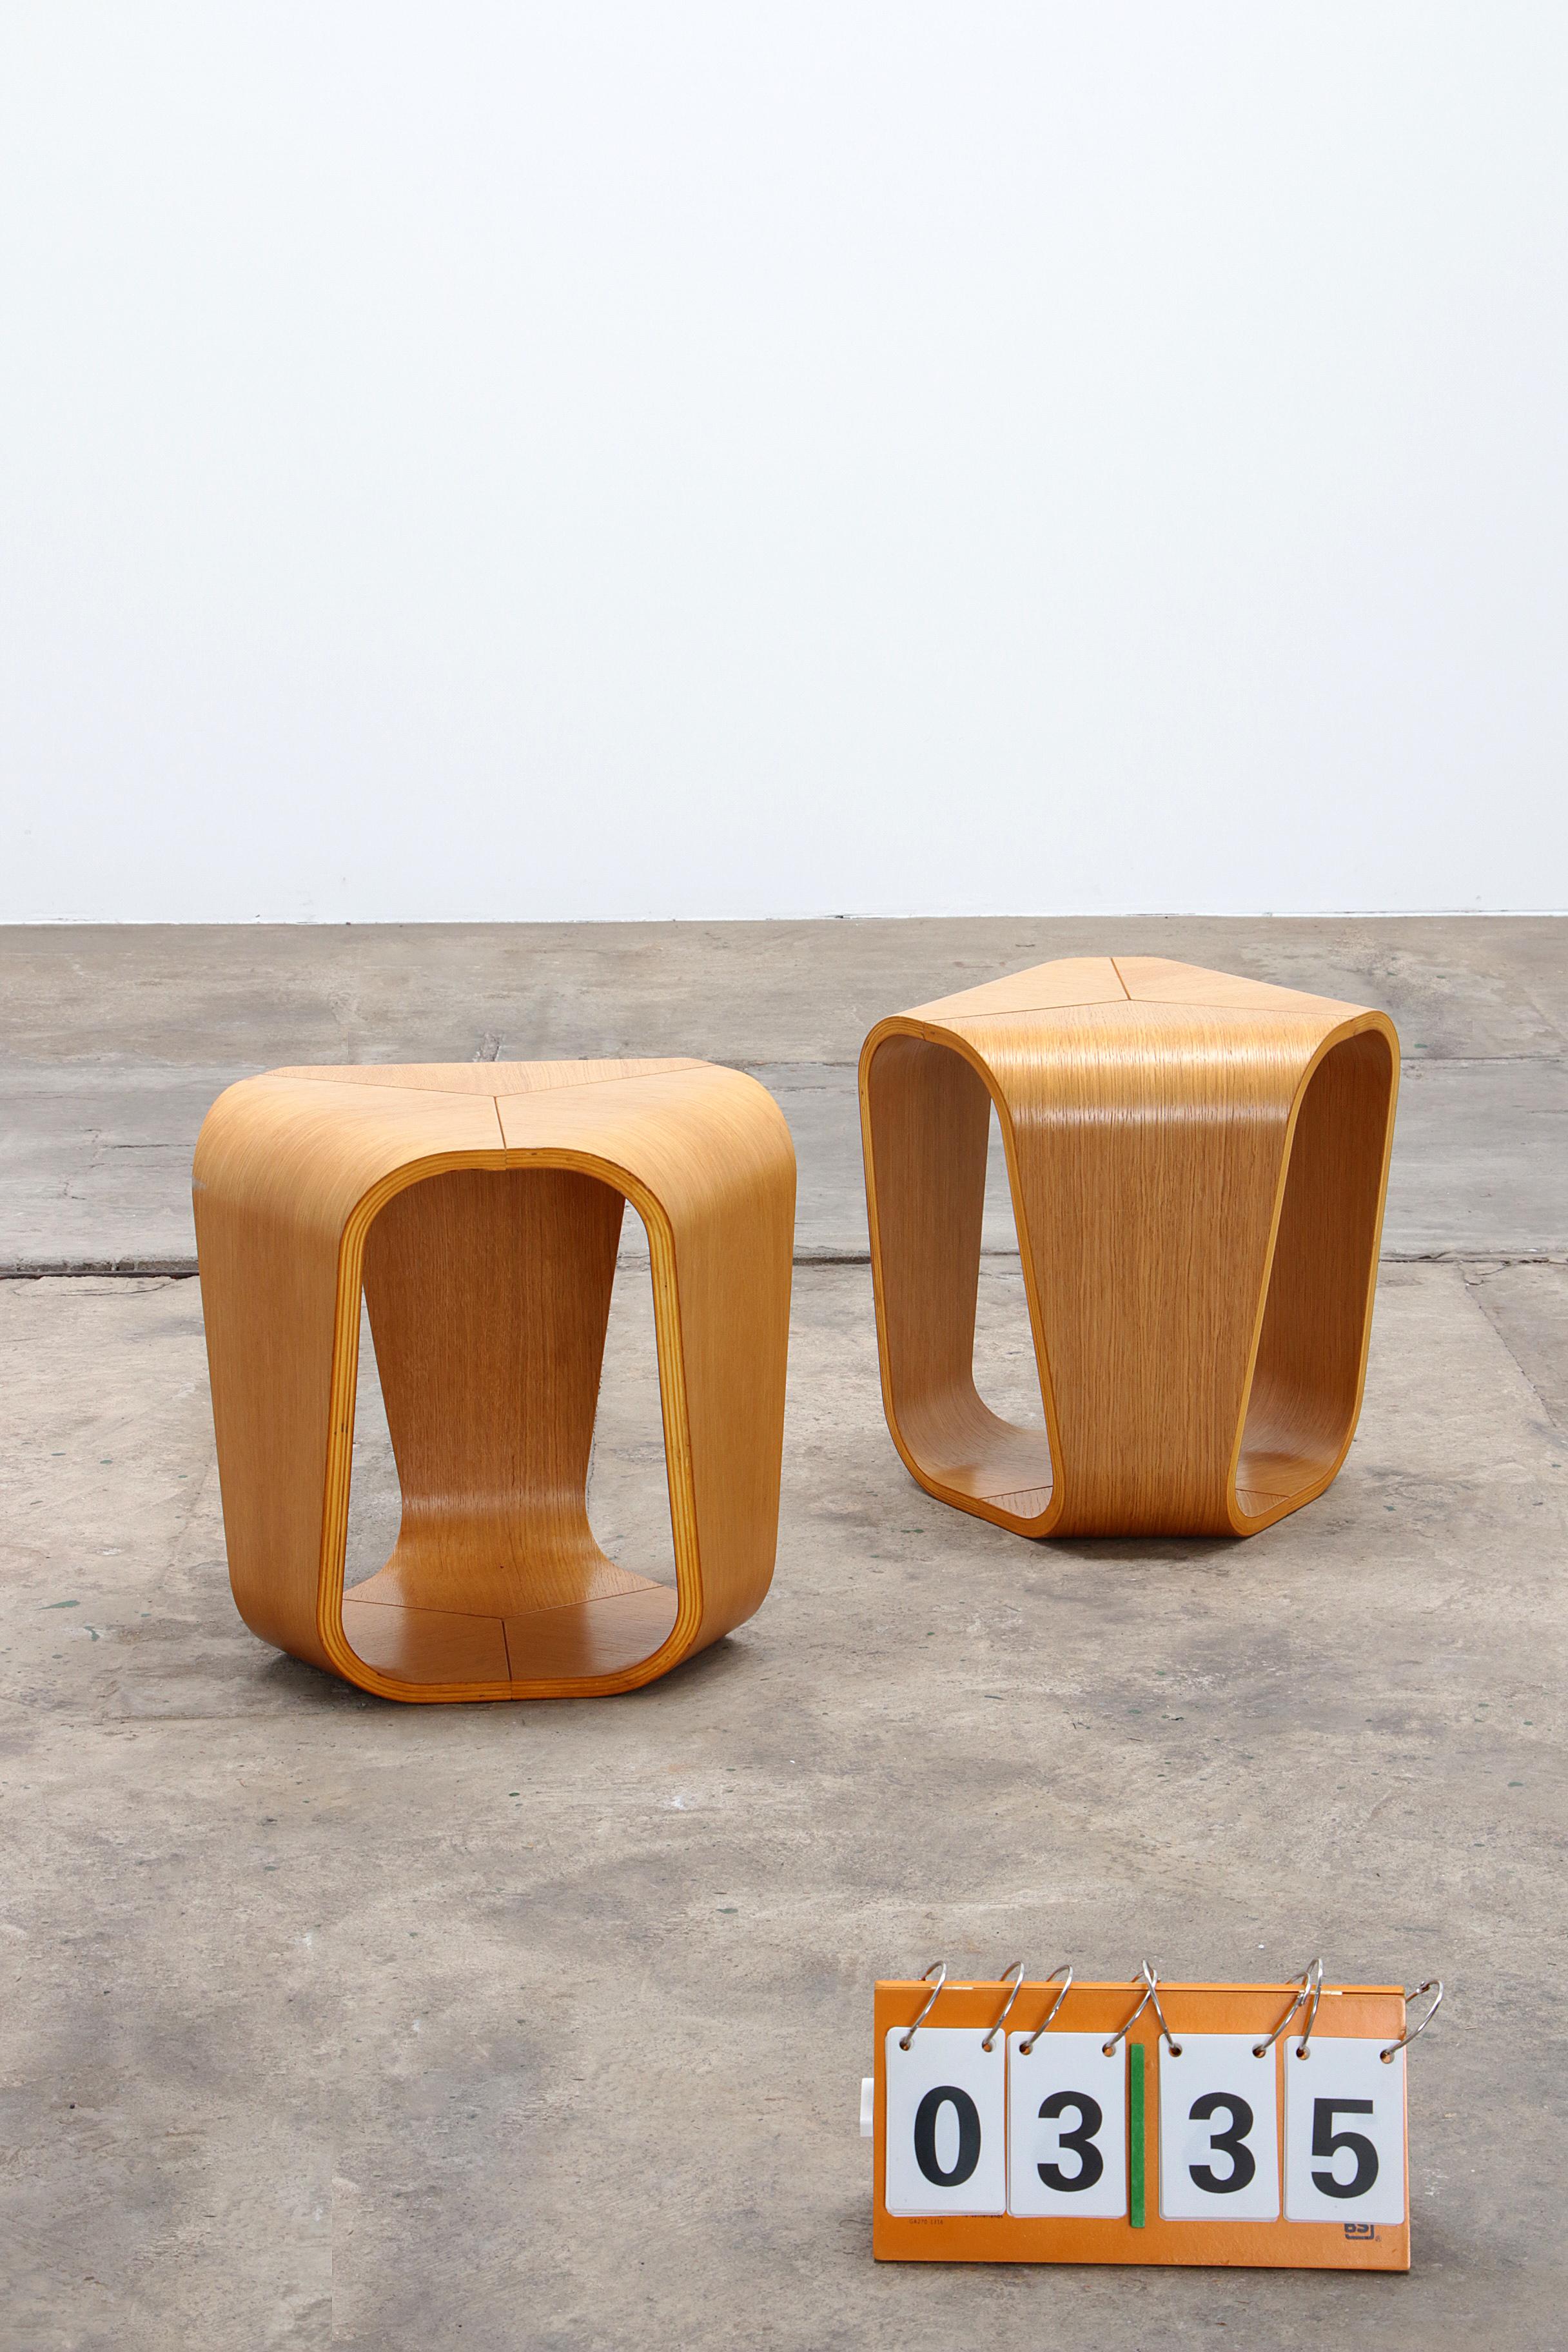 Set of Infinity Tables by Enrico Cesana for Busnelli, Italy, in the 1990s.
Beautiful oak plywood. The design of this table recalls the taste of the 70s and the echoes of the design space era. Perfect for any living room or bedroom as a practical and